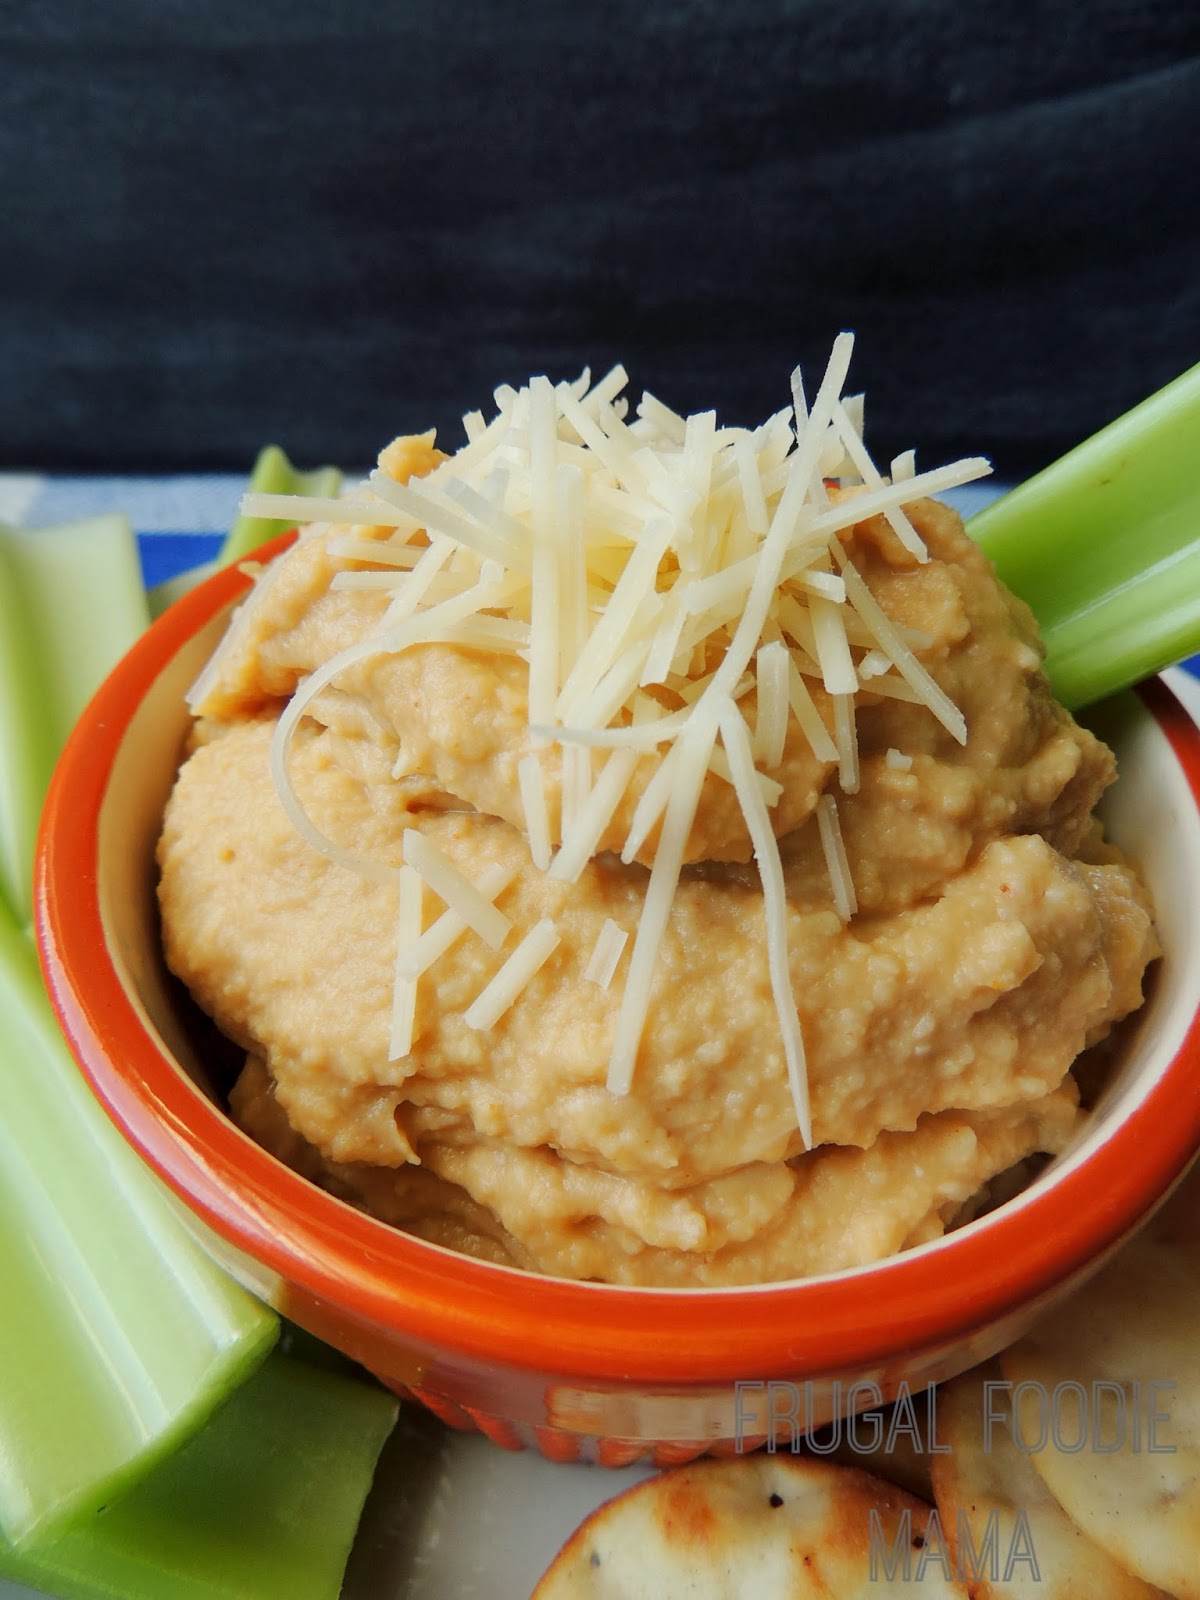 This quick & healthy Buffalo Parmesan Hummus has all the tastiness of a favorite game day flavor minus the guilt.